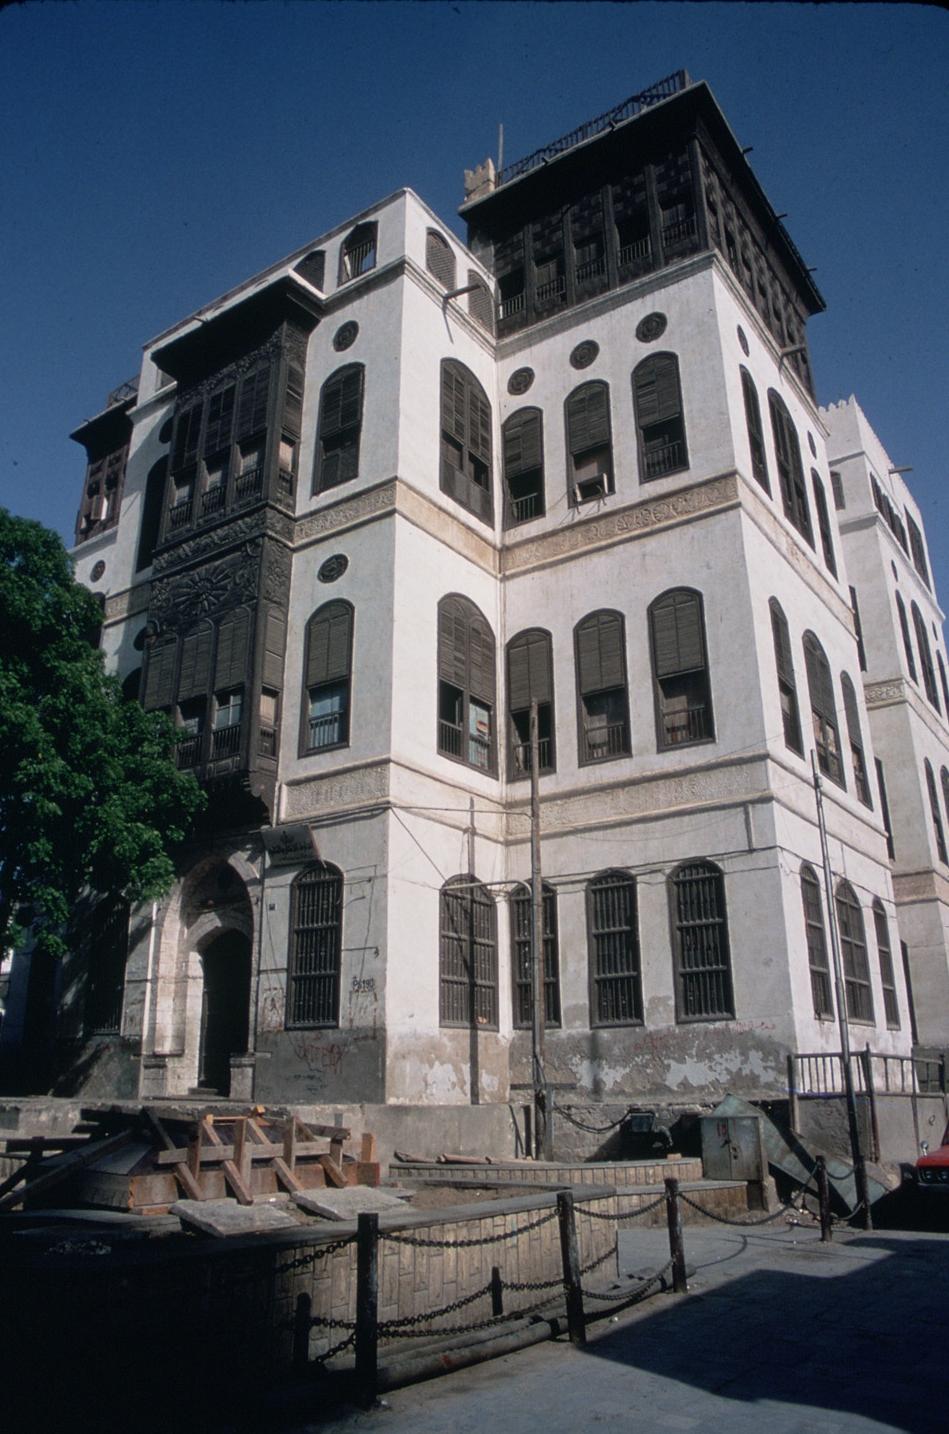 Nassif House Museum